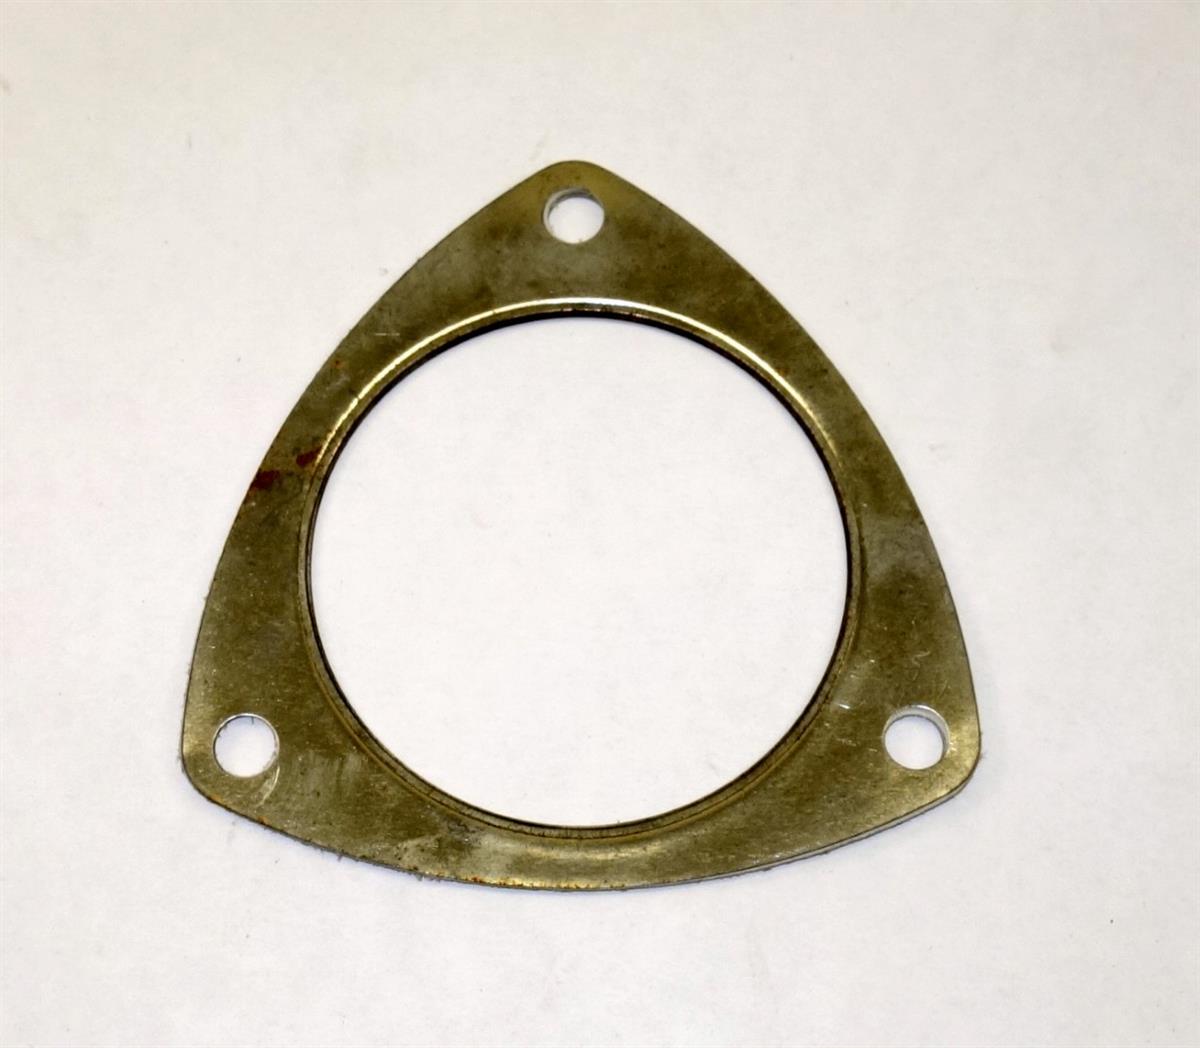 M35-656 | 5330-00-908-6277 Exhaust Pipe Gasket Elbow to Pipe for M35A2 Series with Multi Fuel Engine NOS (1).JPG